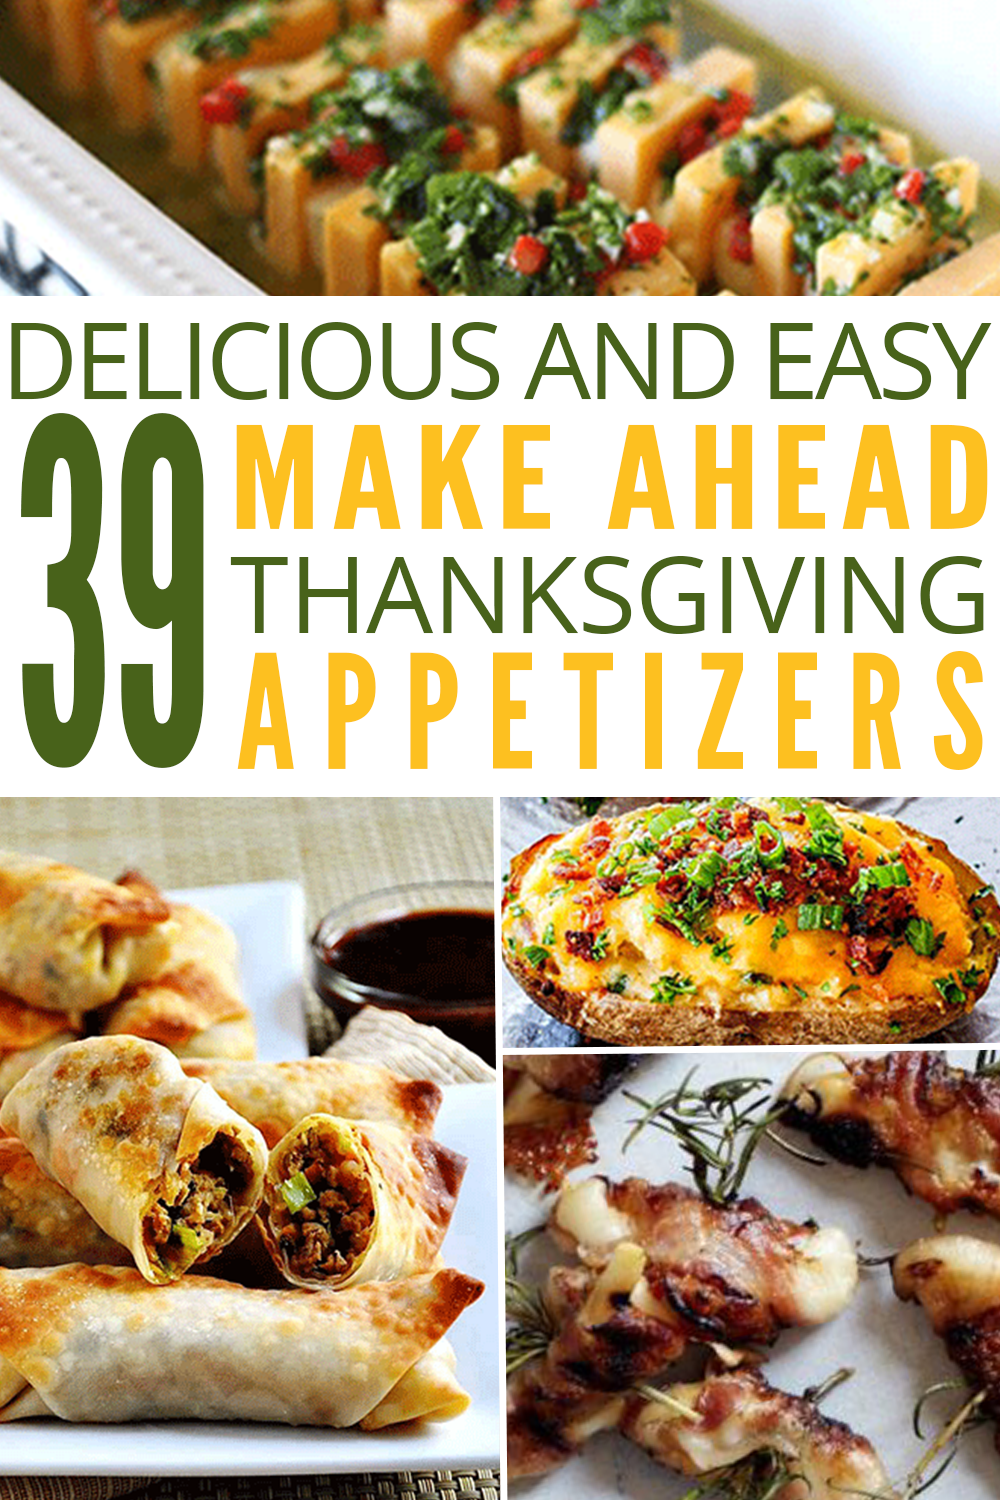 39 Easy and Delicious Make-Ahead Thanksgiving Appetizers | Edit + Nest - 39 Easy and Delicious Make-Ahead Thanksgiving Appetizers | Edit + Nest -   18 thanksgiving appetizers easy ideas